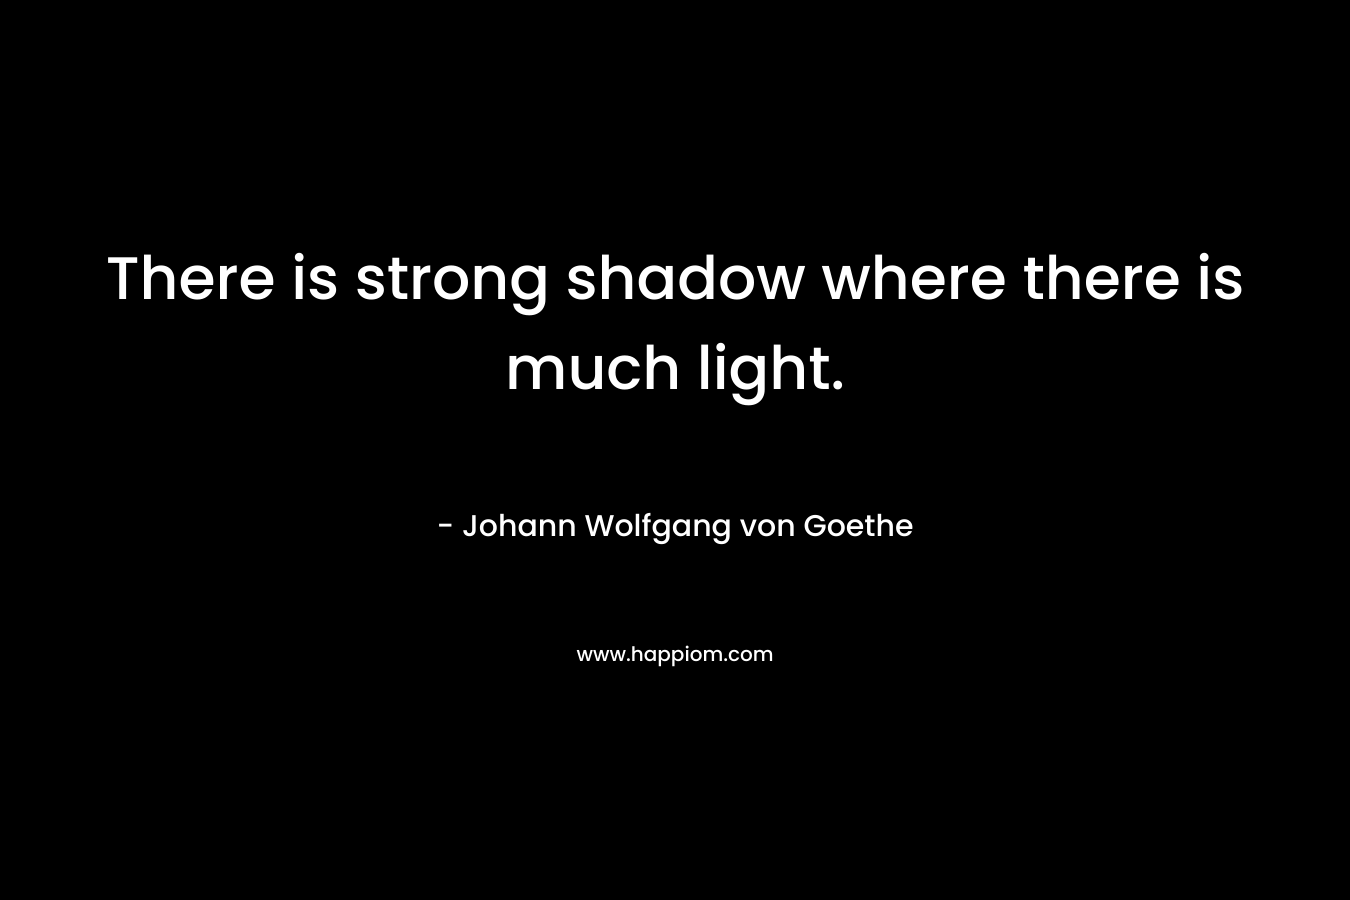 There is strong shadow where there is much light. – Johann Wolfgang von Goethe